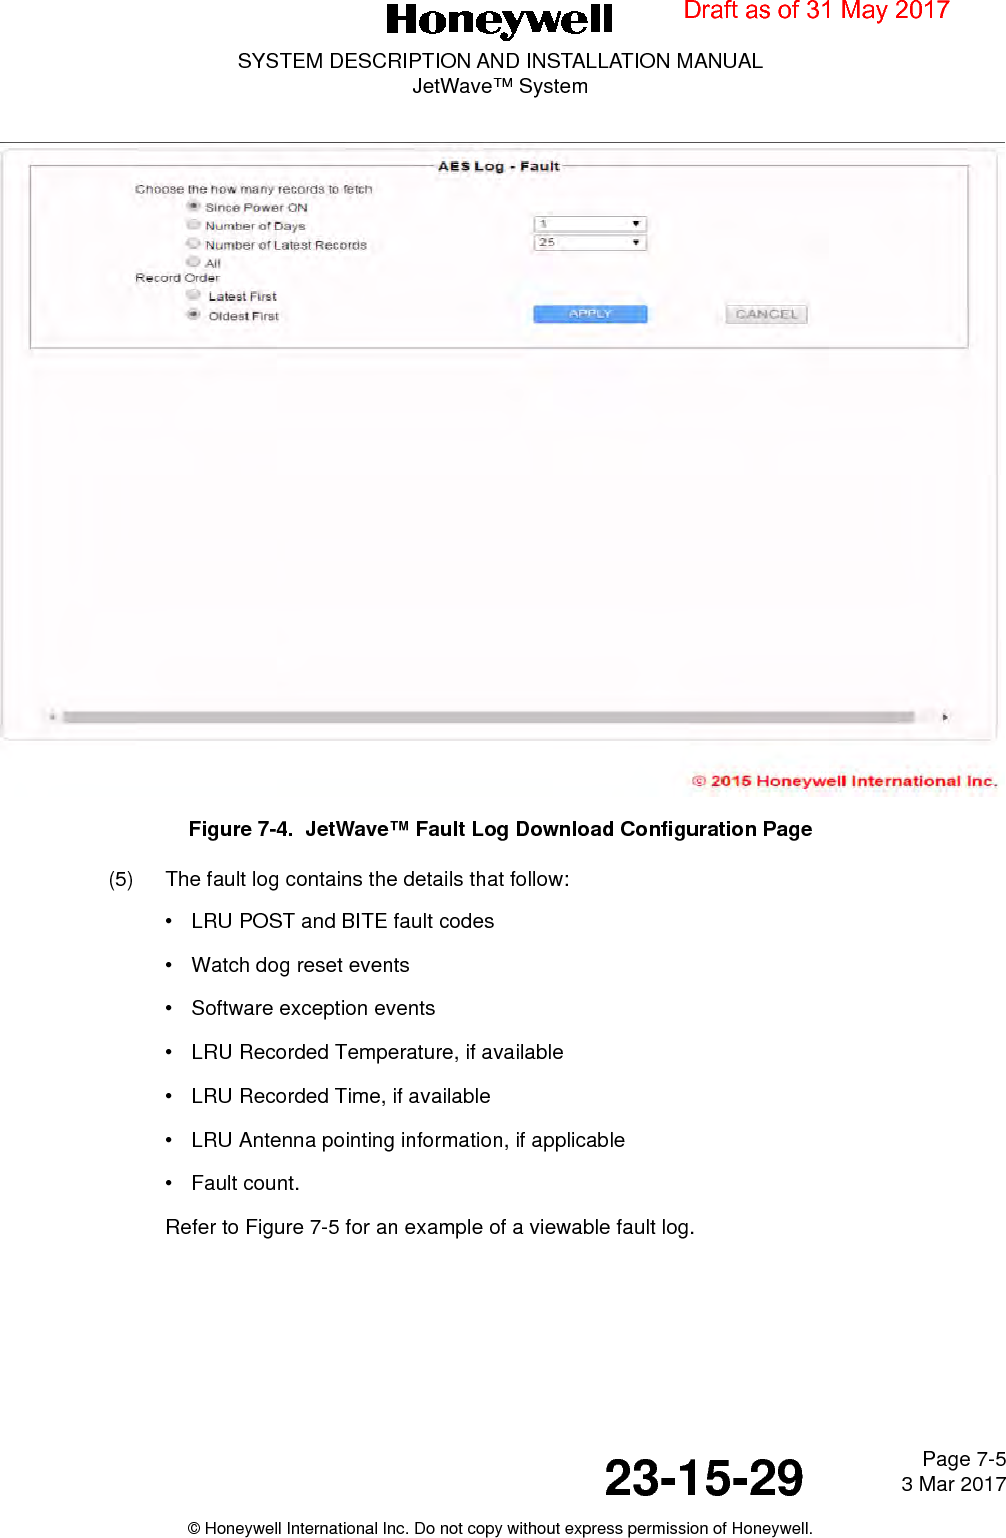 Page 7-5 3 Mar 201723-15-29SYSTEM DESCRIPTION AND INSTALLATION MANUALJetWave™ System© Honeywell International Inc. Do not copy without express permission of Honeywell.Figure 7-4.  JetWave™ Fault Log Download Configuration Page(5) The fault log contains the details that follow:• LRU POST and BITE fault codes• Watch dog reset events• Software exception events• LRU Recorded Temperature, if available• LRU Recorded Time, if available• LRU Antenna pointing information, if applicable•Fault count.Refer to Figure 7-5 for an example of a viewable fault log.Draft as of 31 May 2017